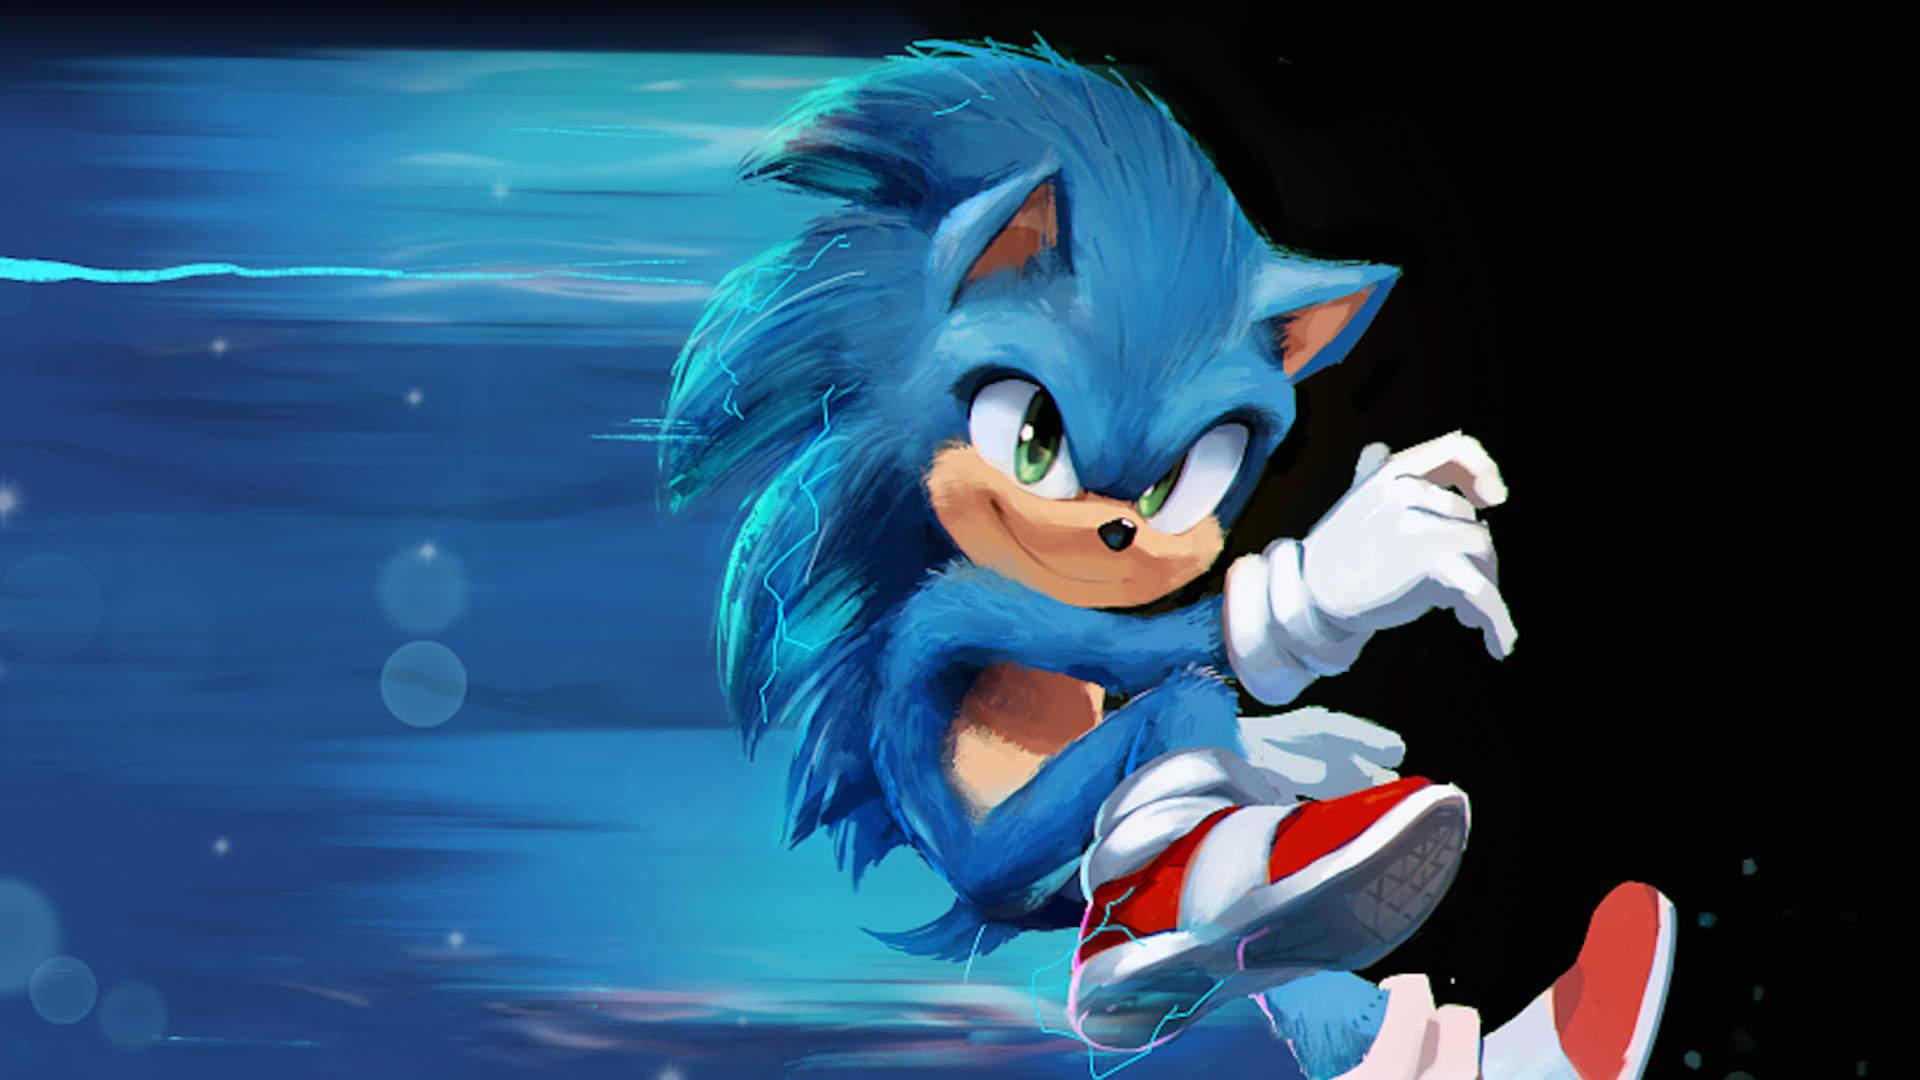 The Artist Who Led Movie Sonic's Redesign Has a Long History With